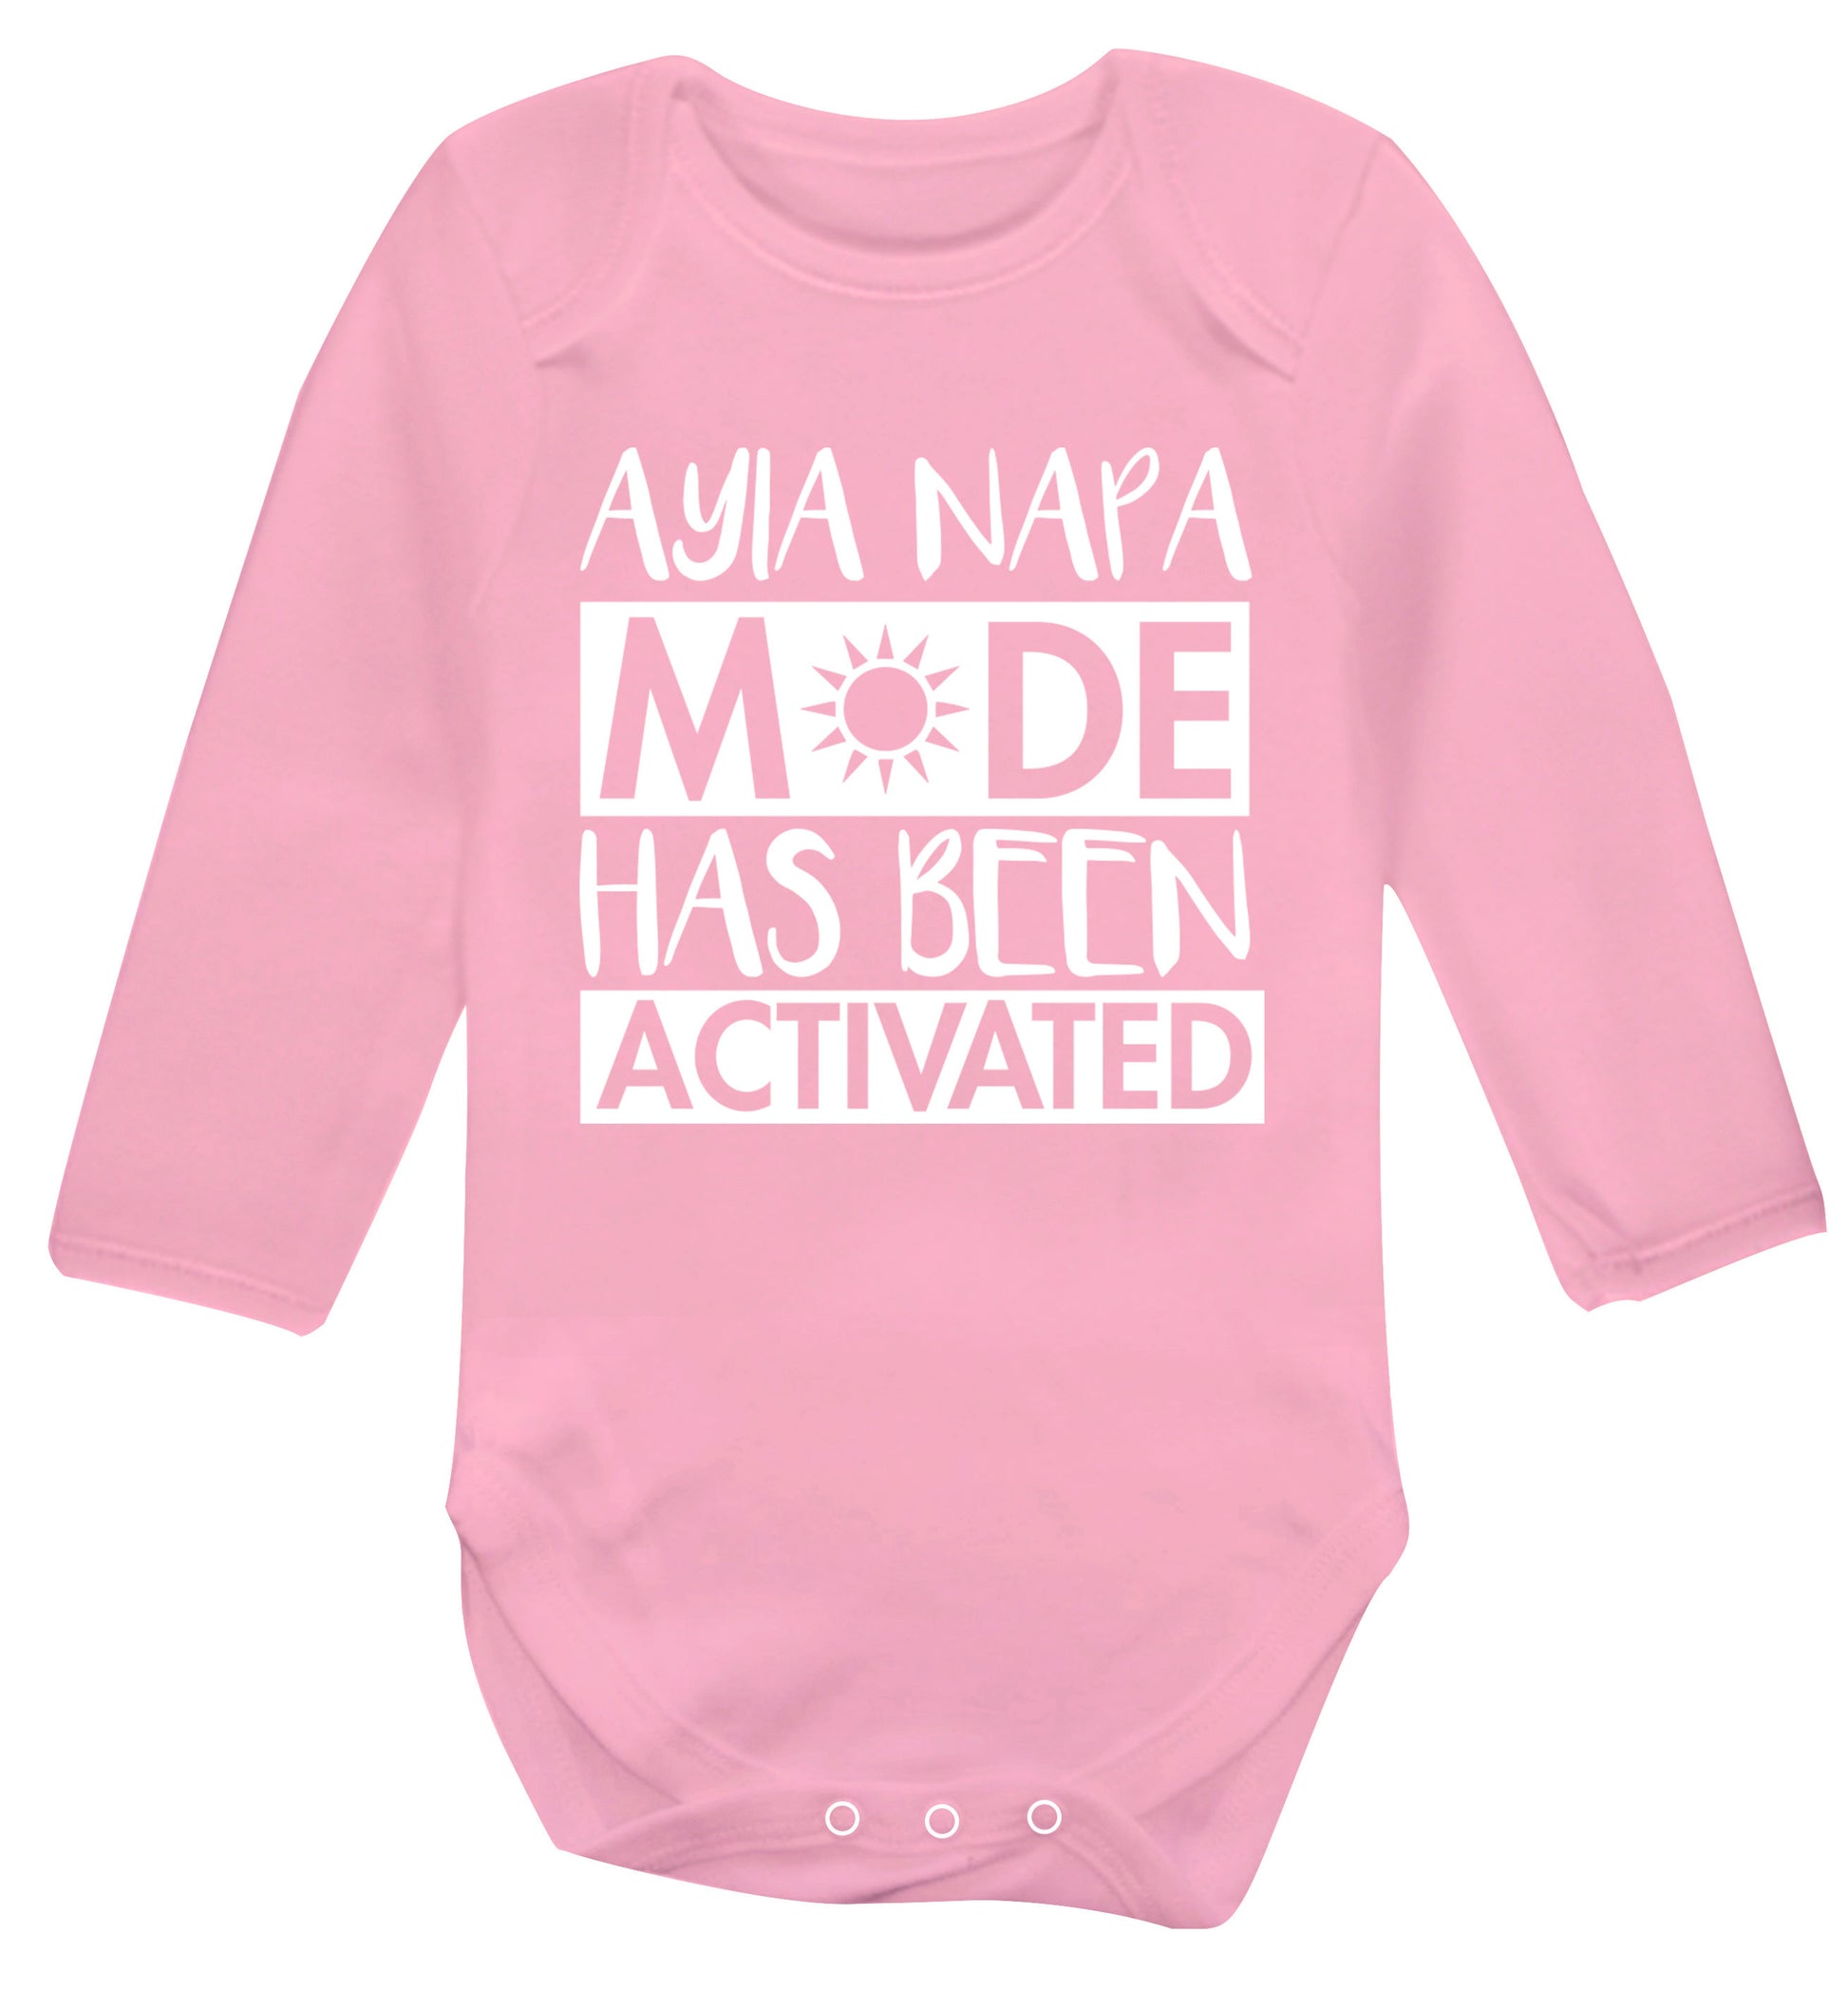 Aiya Napa mode has been activated Baby Vest long sleeved pale pink 6-12 months